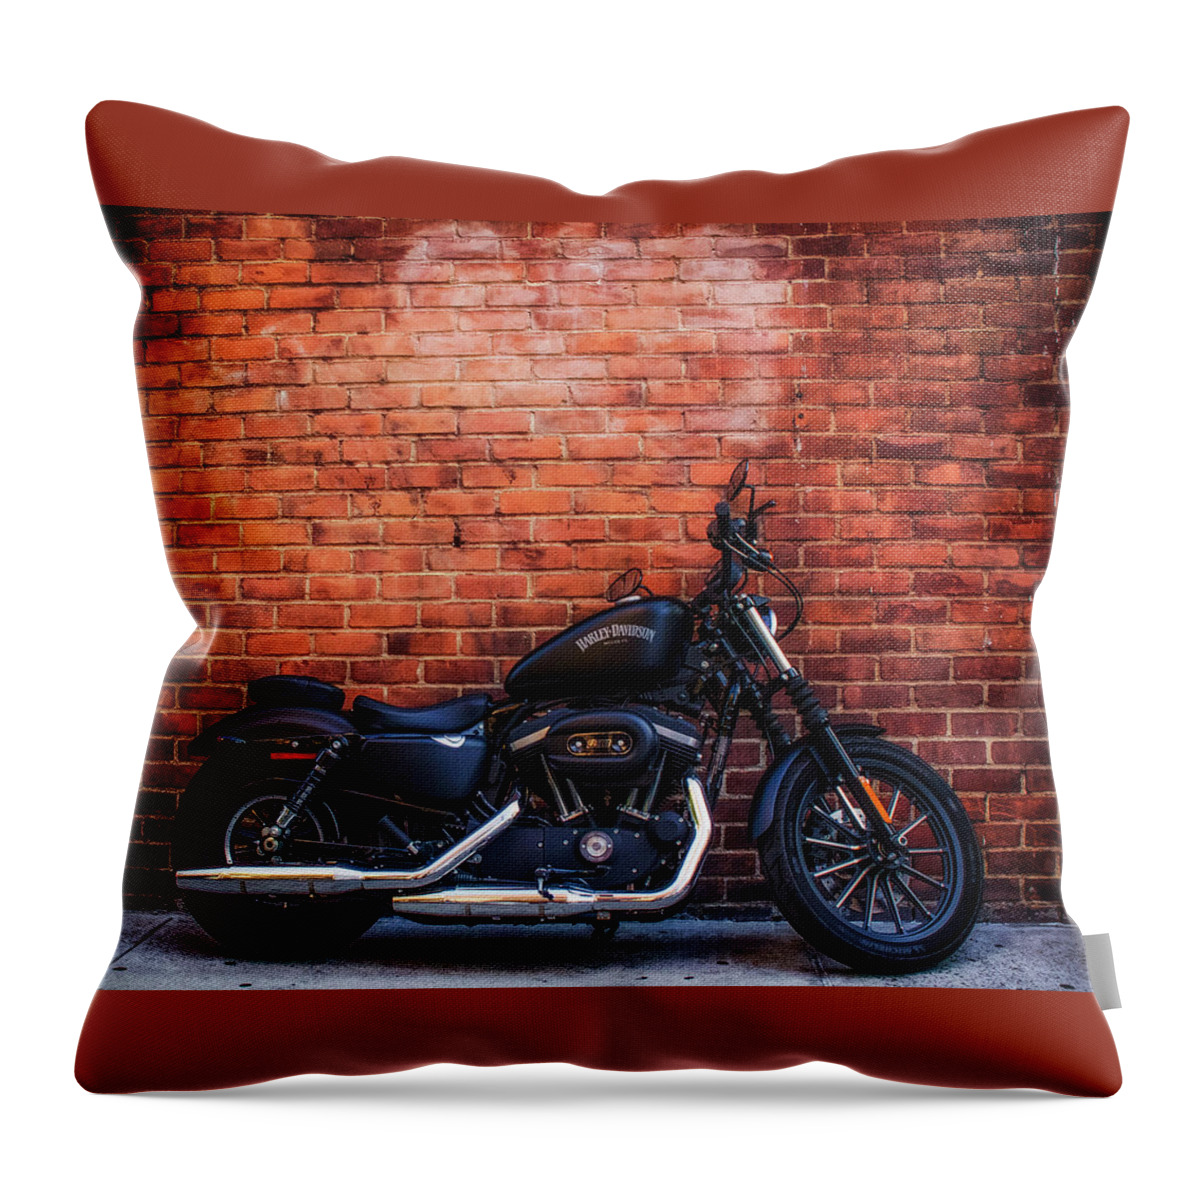 Harley Davidson Throw Pillow featuring the photograph Harley 883 by GeeLeesa Productions